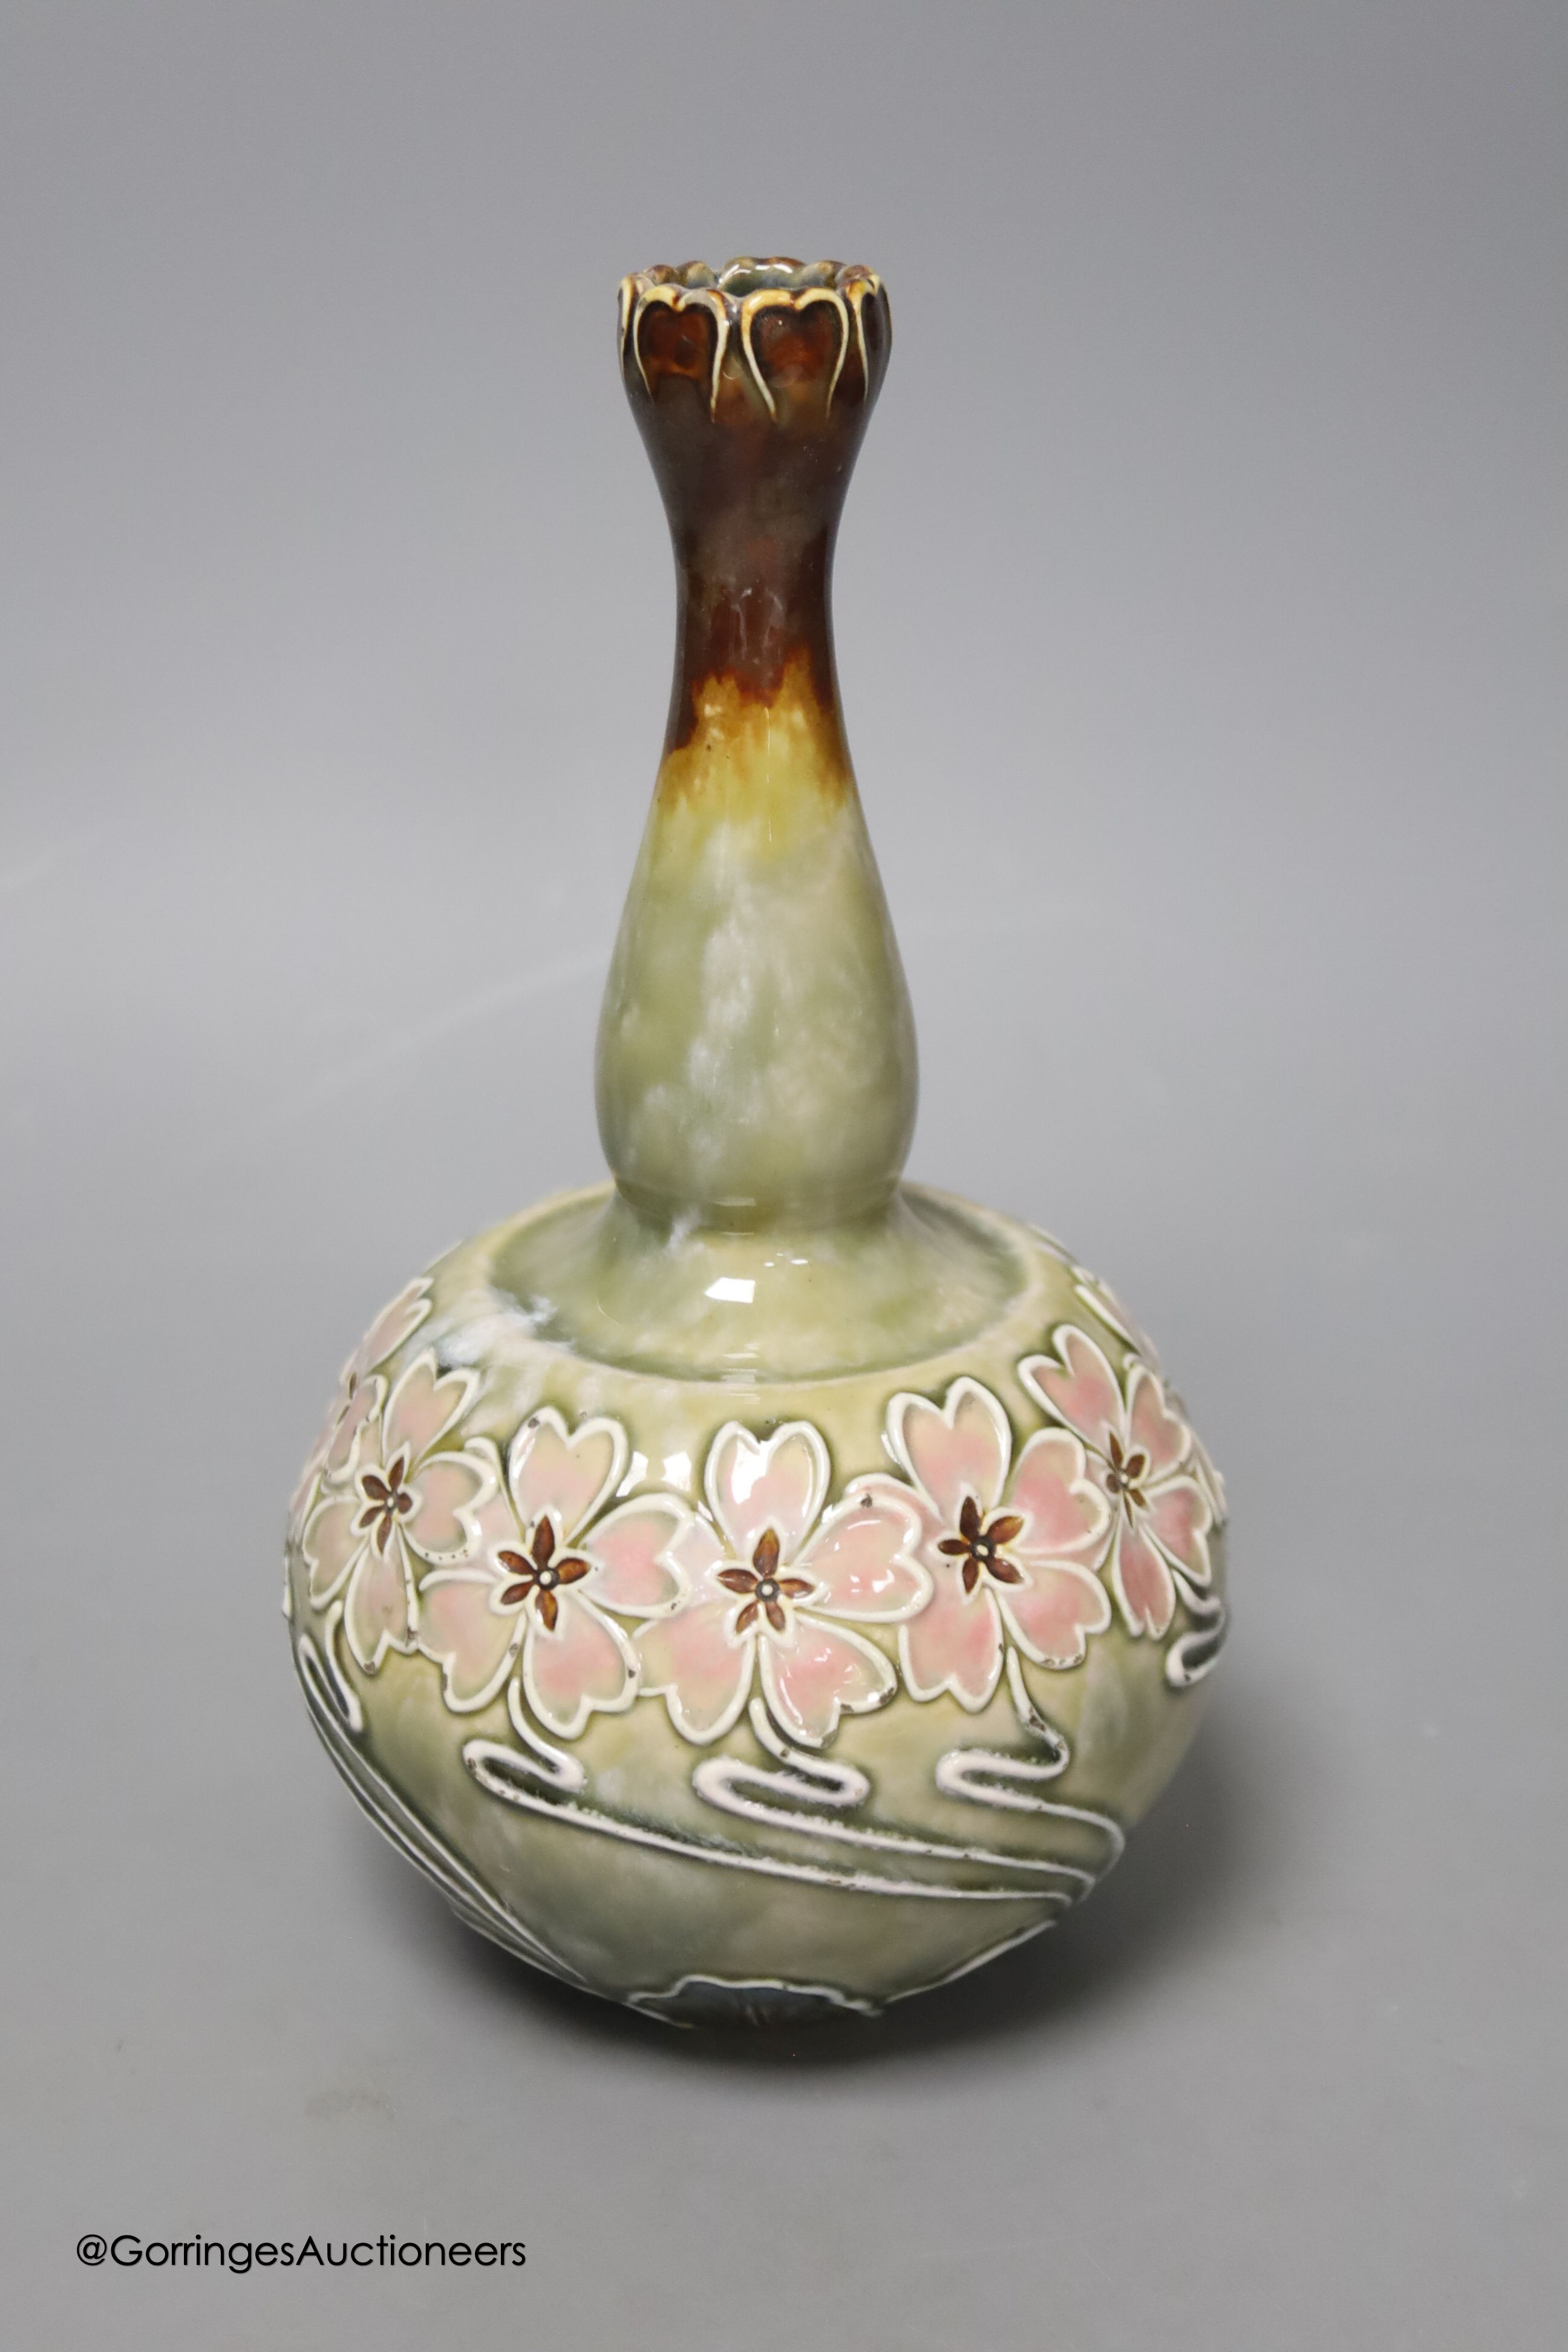 A Royal Doulton stoneware pink flower vase by Eliza Simmance, height 21cm